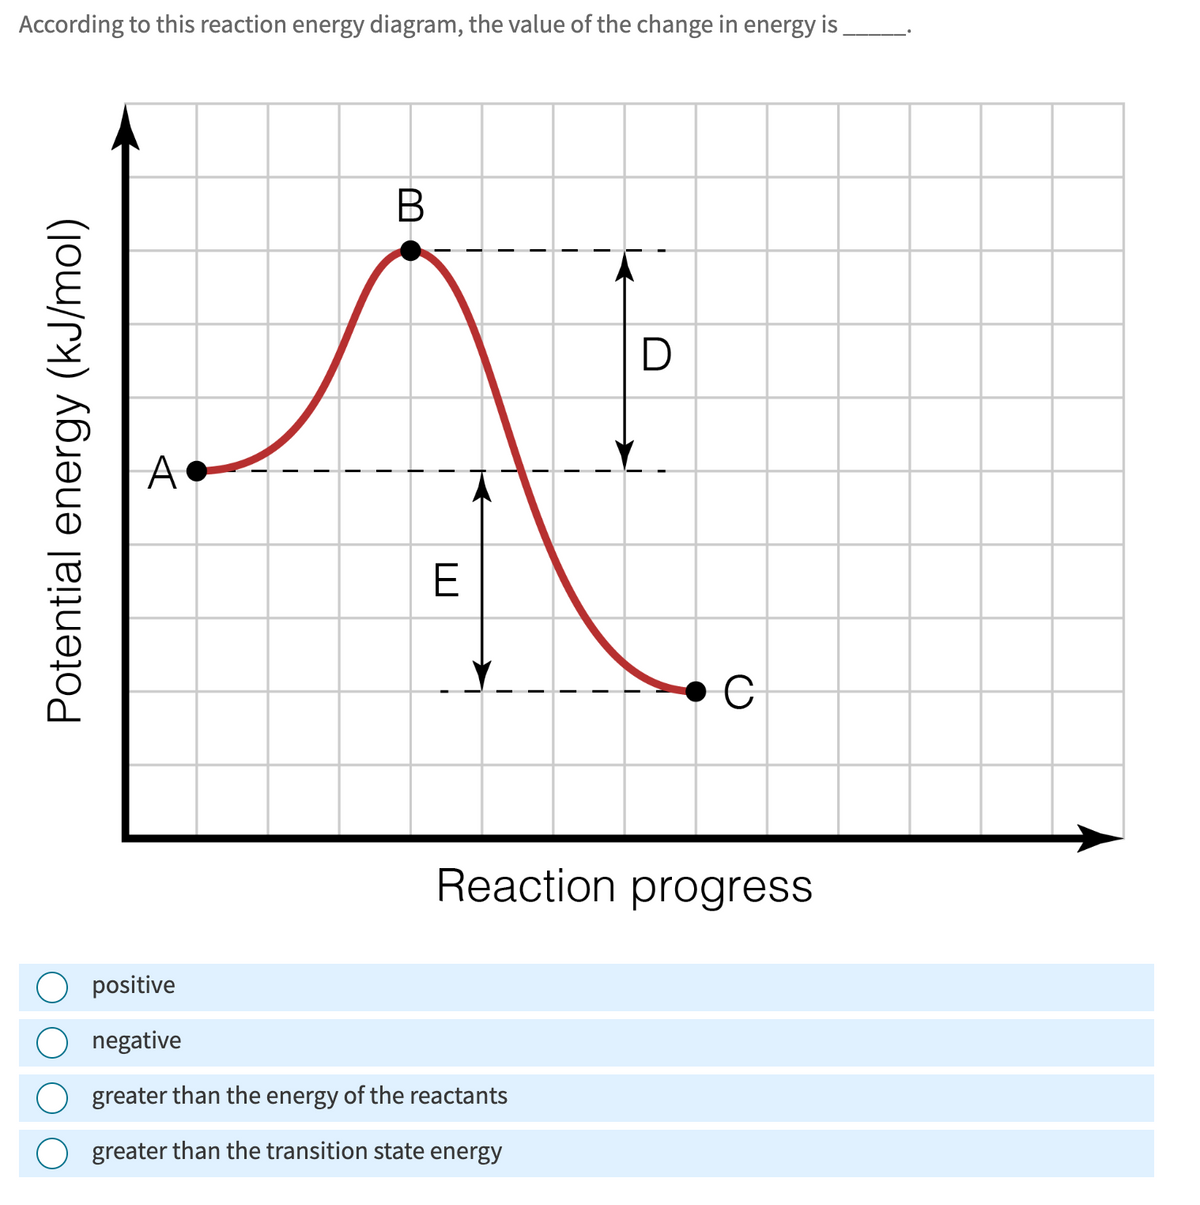 According to this reaction energy diagram, the value of the change in energy is.
Potential energy (kJ/mol)
A
ヨ
ԱՄ
B
D
C
Reaction progress
positive
negative
greater than the energy of the reactants
greater than the transition state energy